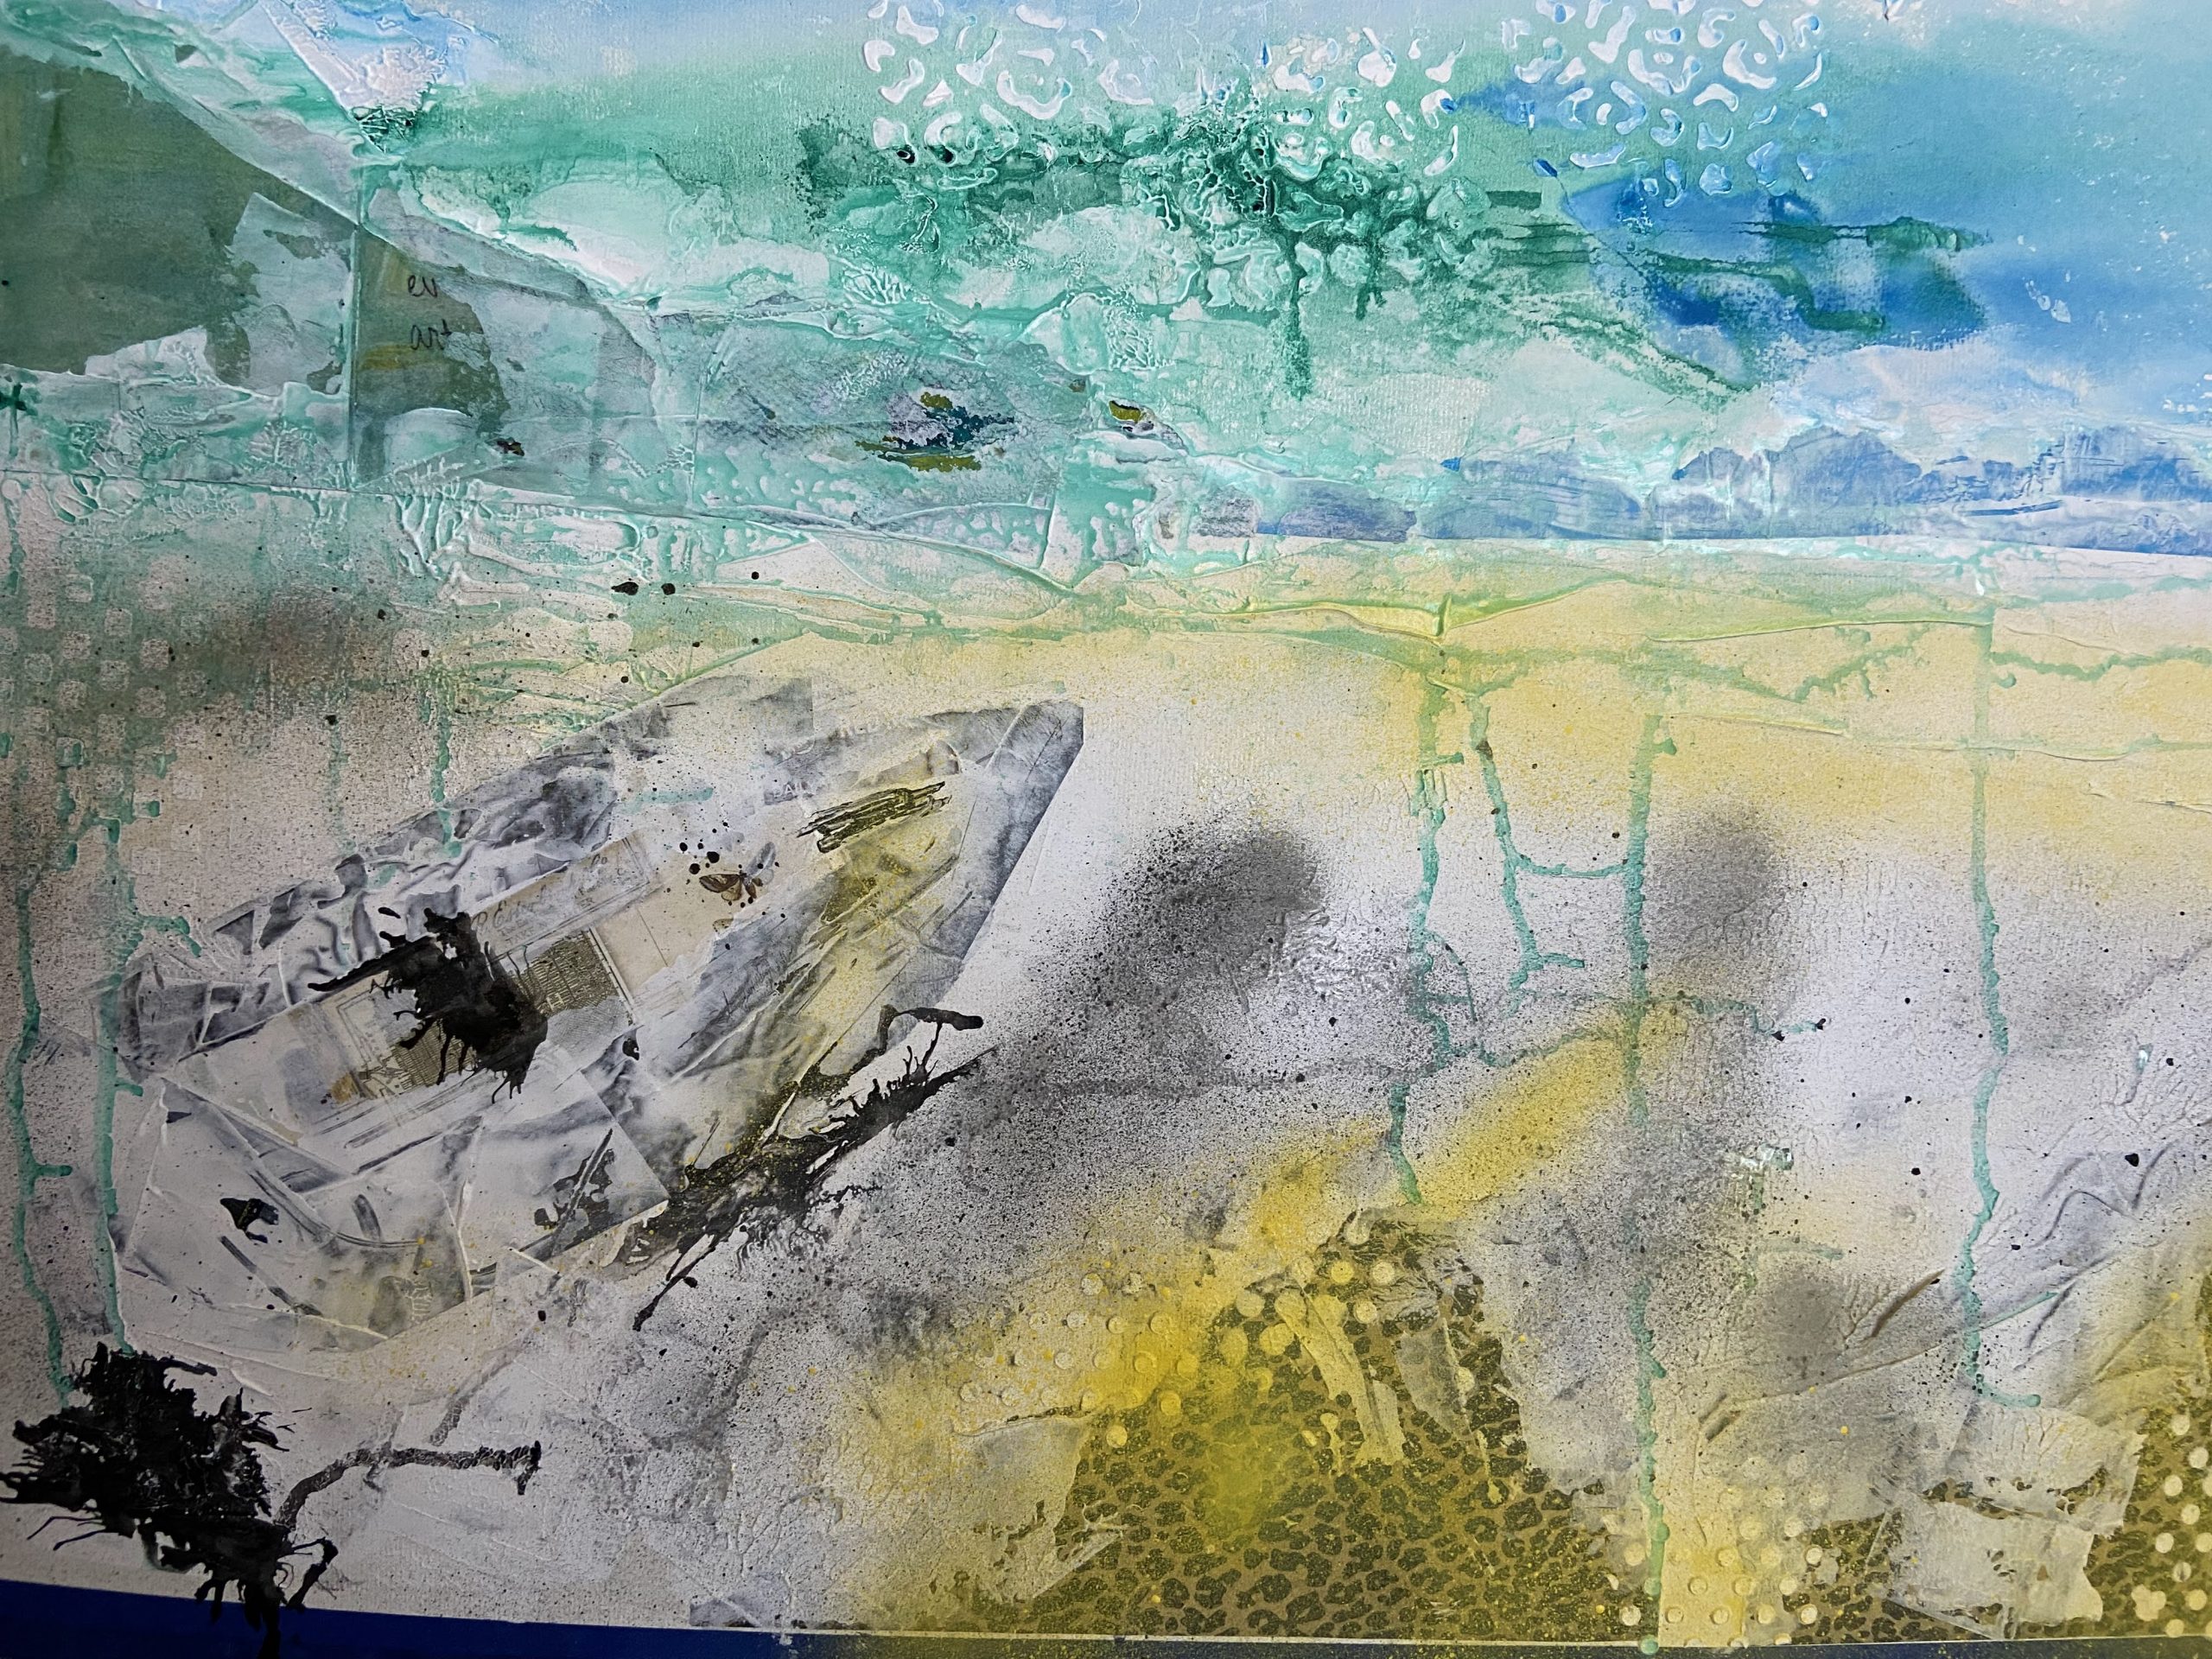 Second layer of a painting of a boat on a shor using stencils and fiber past